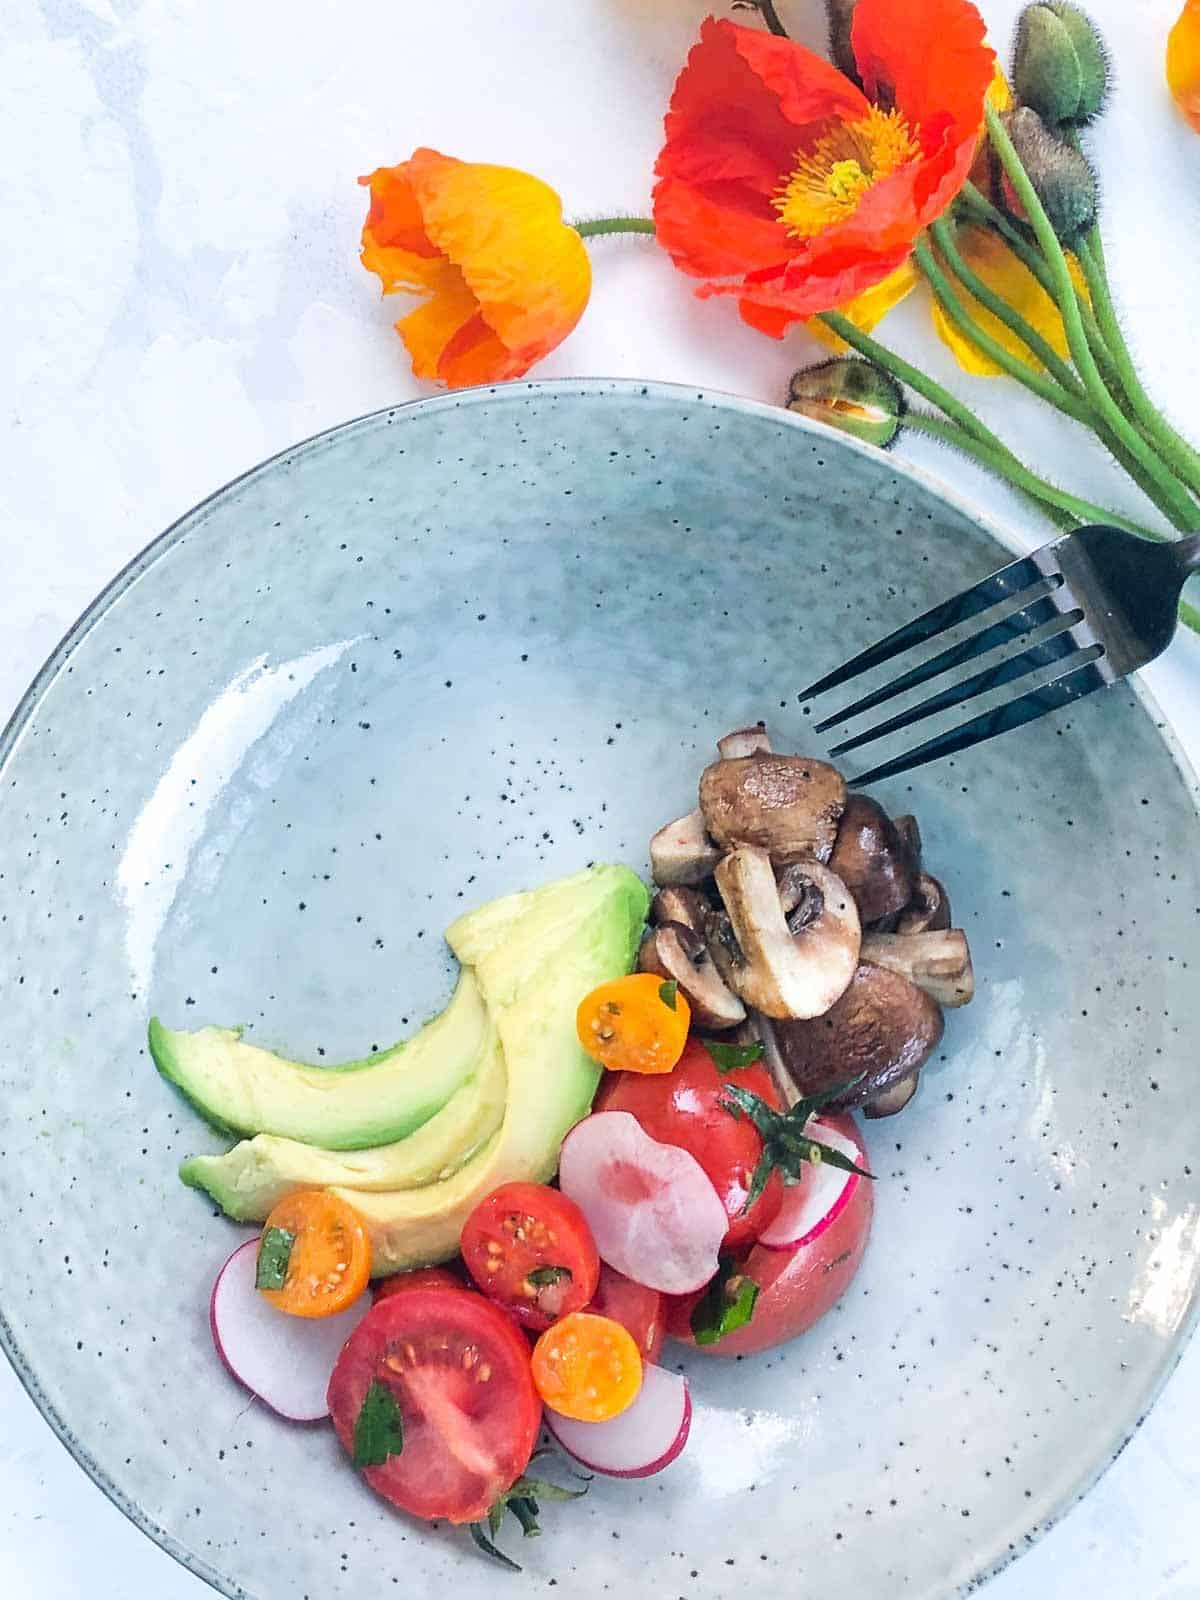 Breakfast Salad with Mushrooms, Avocado and Tomatoes on a blue plate with a black fork and flowers on the side